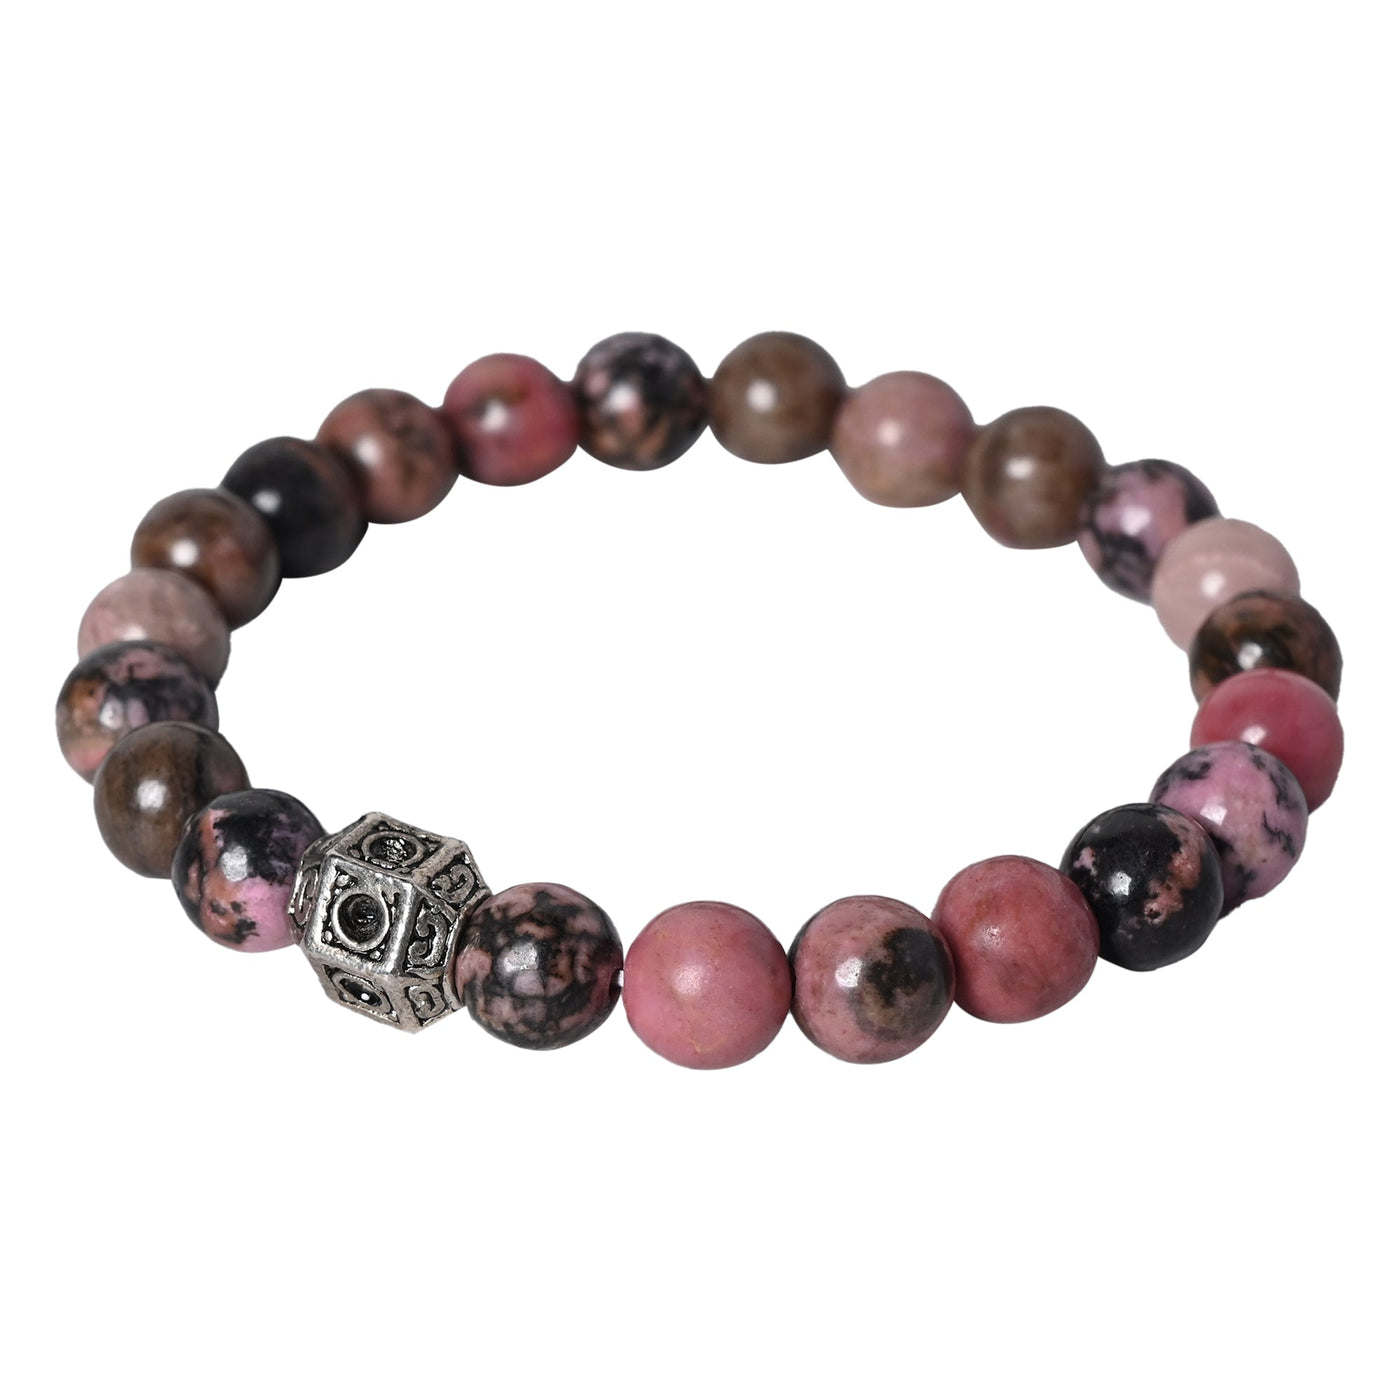 Gemstone Healing Bracelet Rhodonite helps in achieve goal ang good during time of transformation, it bring sympathy and empathy towards other